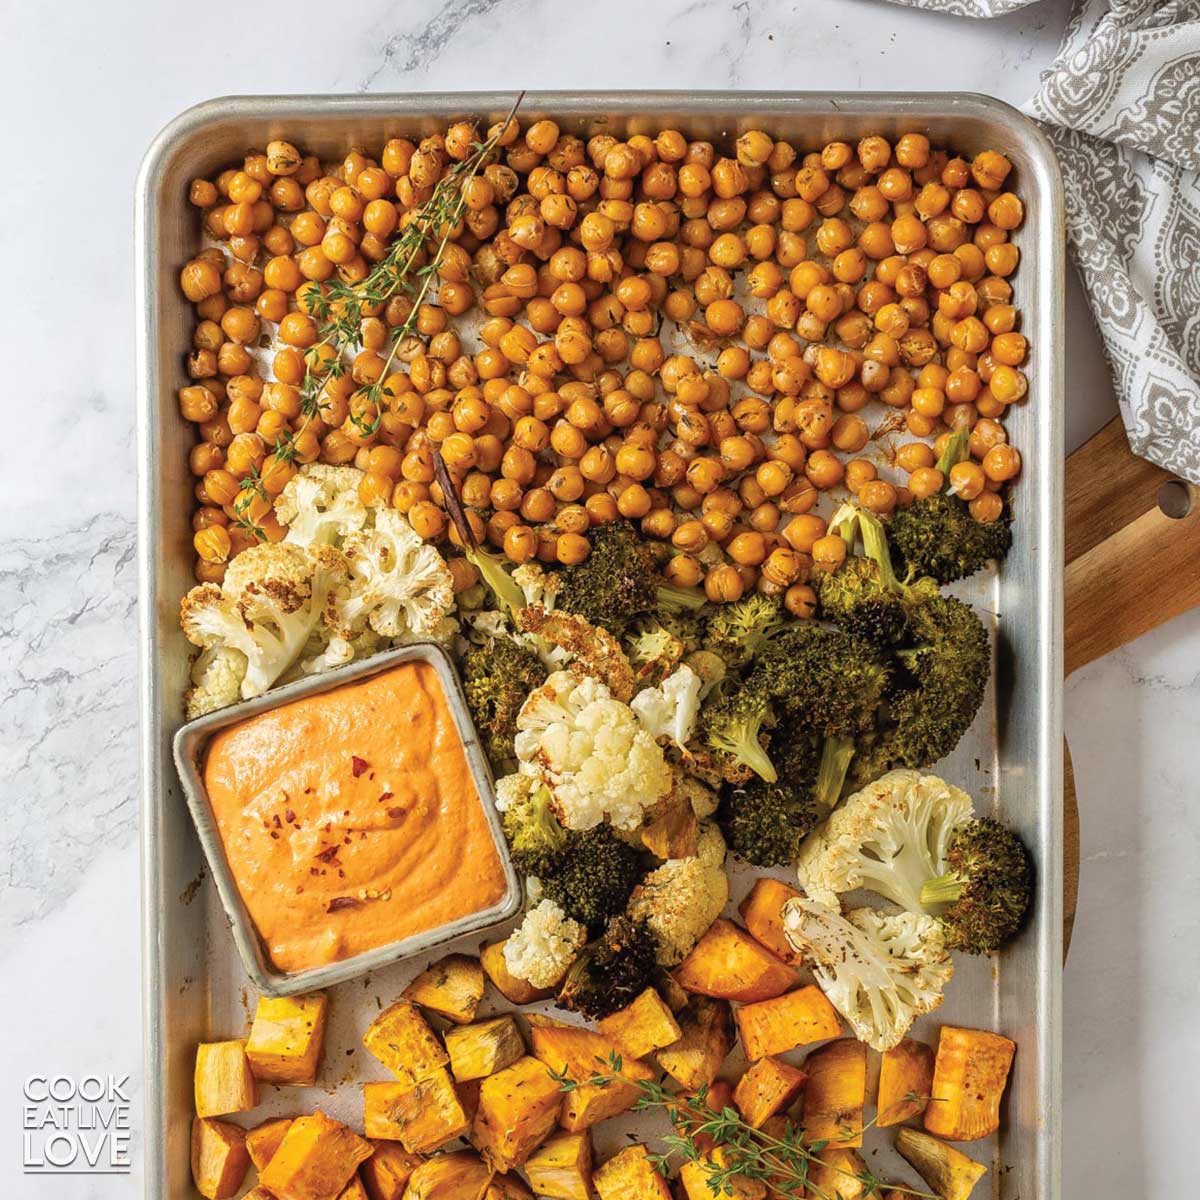 Chickpeas and vegetables cooked on a sheet pan with sauce in a bowl in the middle.